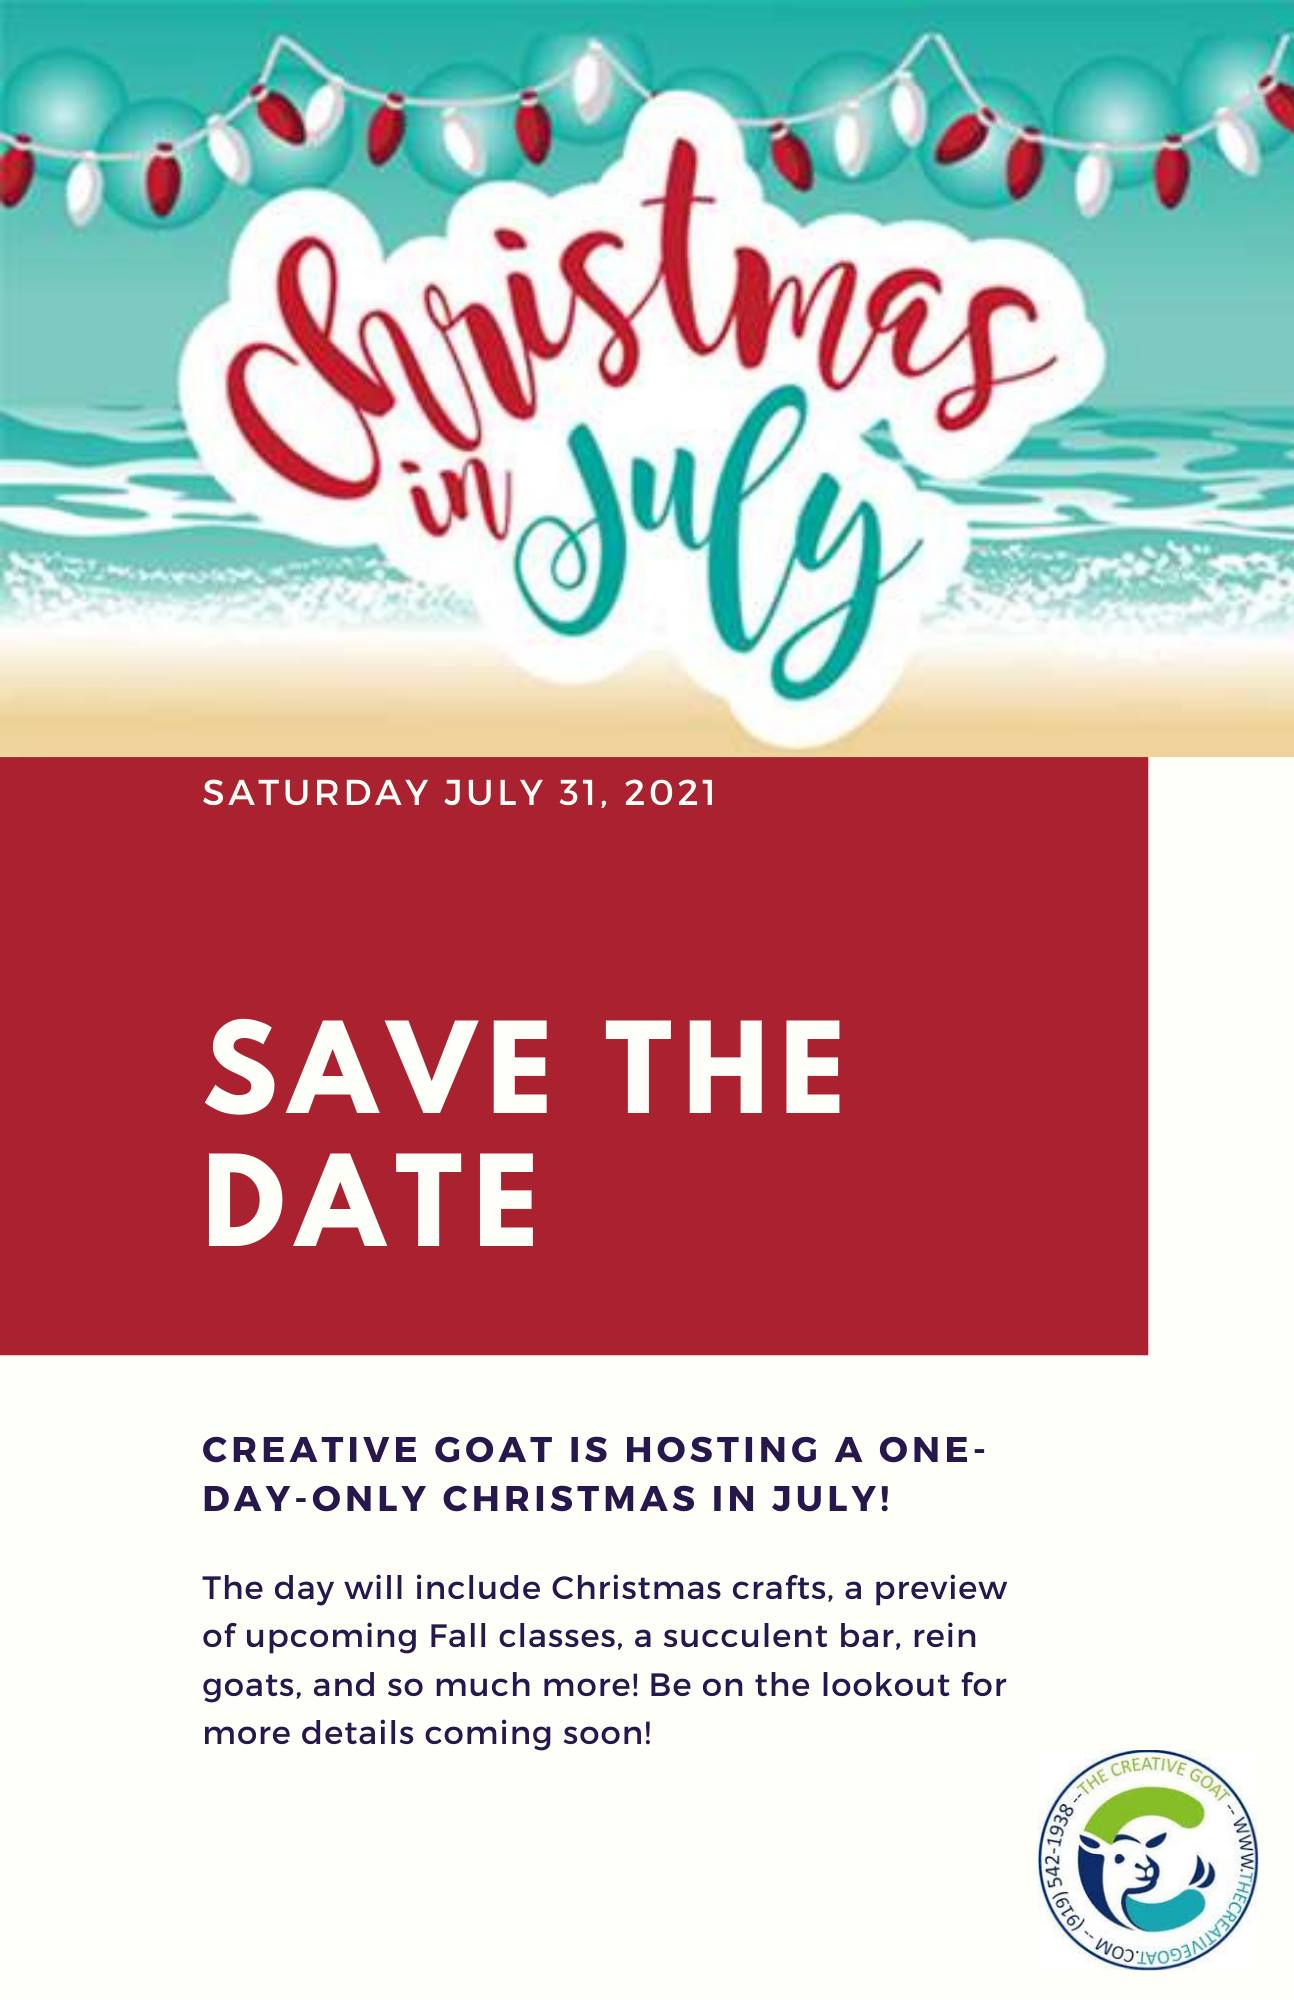 Christmas in July at The Creative Goat!